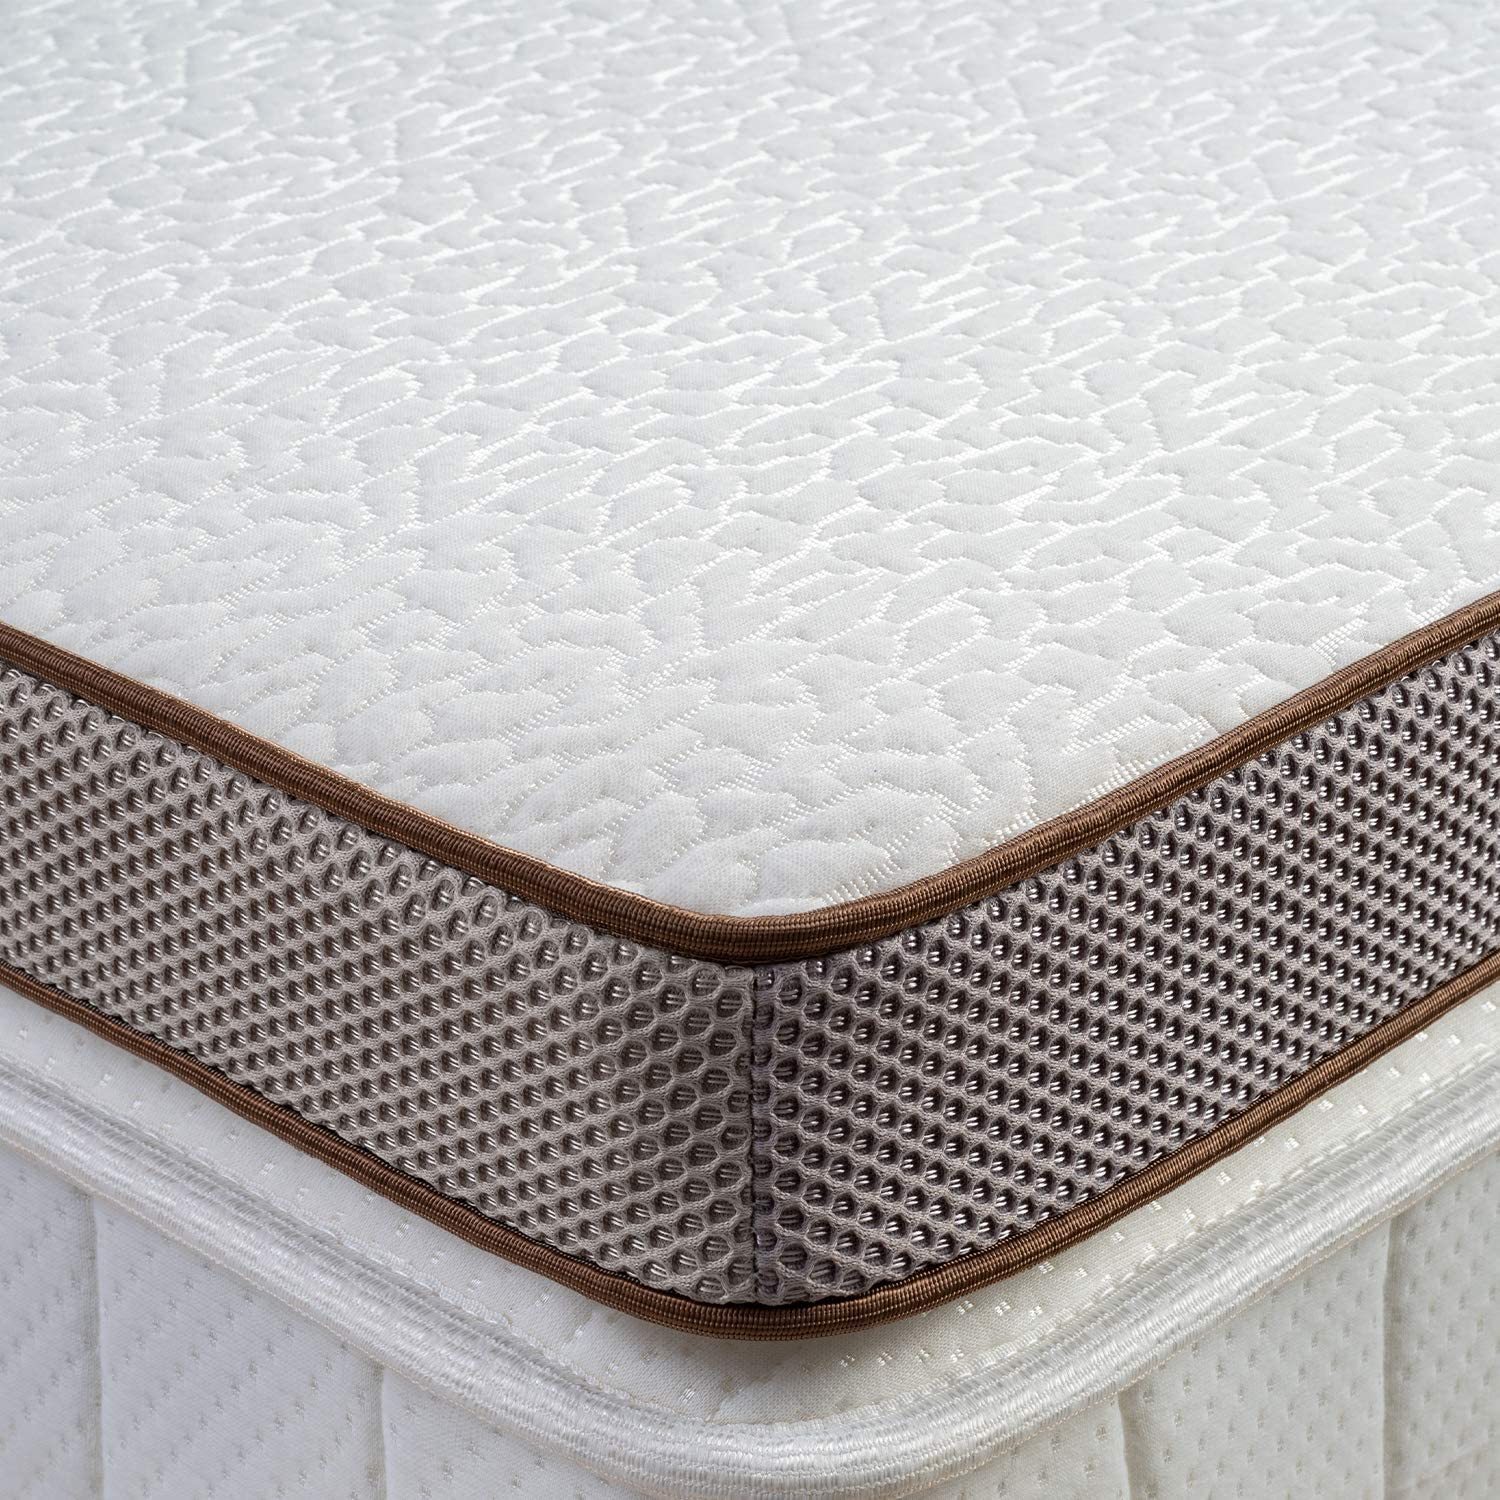 BedStory 4 Inch Memory Foam Mattress Topper, Queen Size Gel Infused Bed Toppers, - $220.99